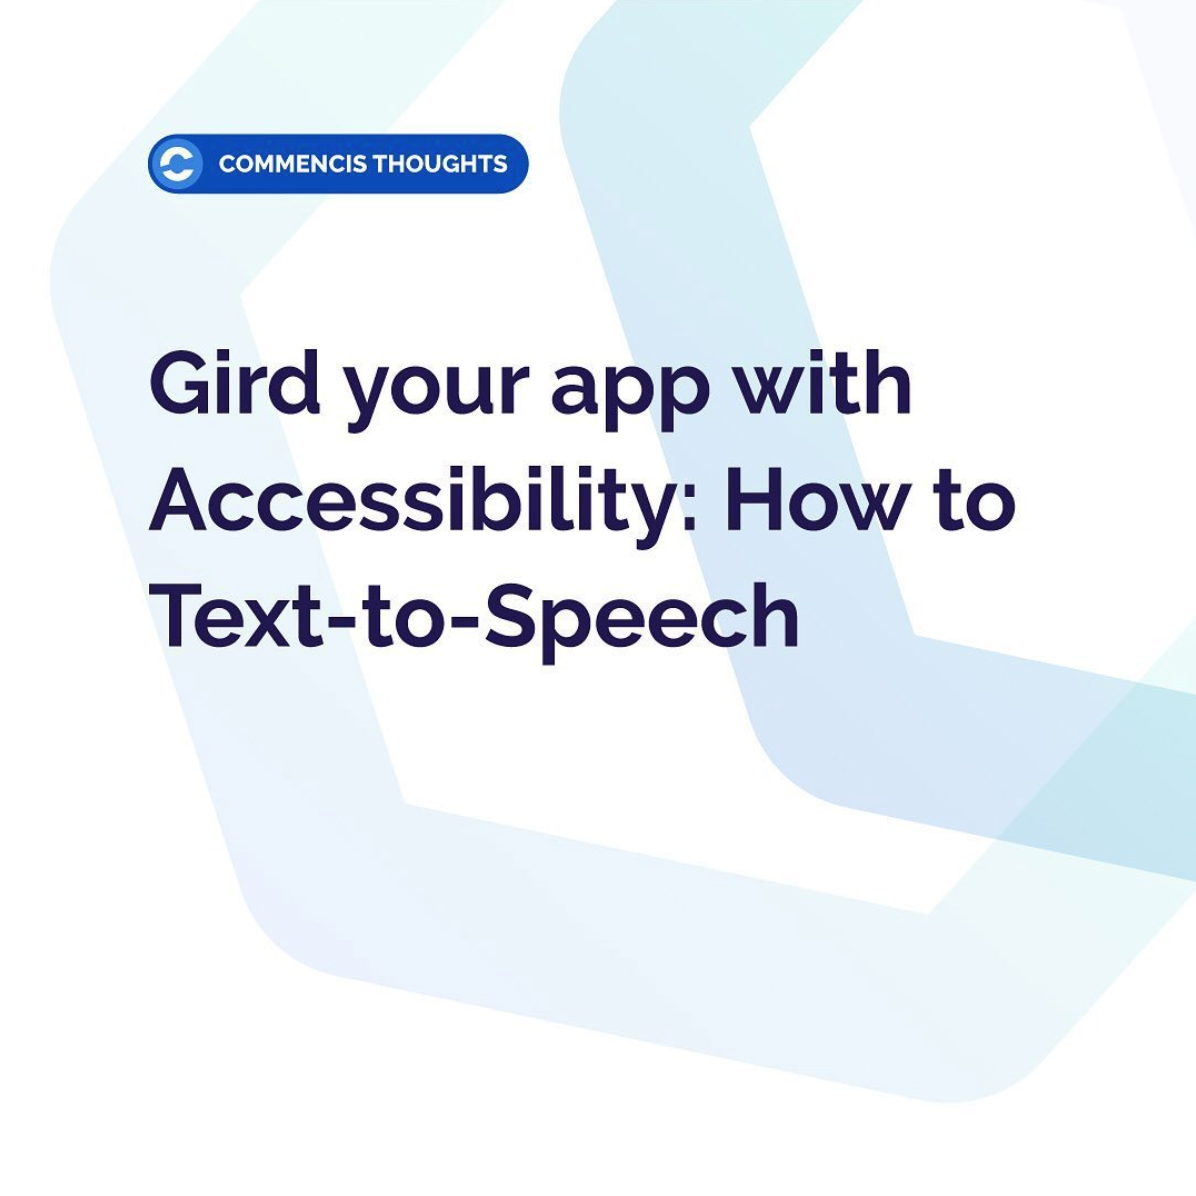 Gird your app with Accessibility How to Text-to-Speech